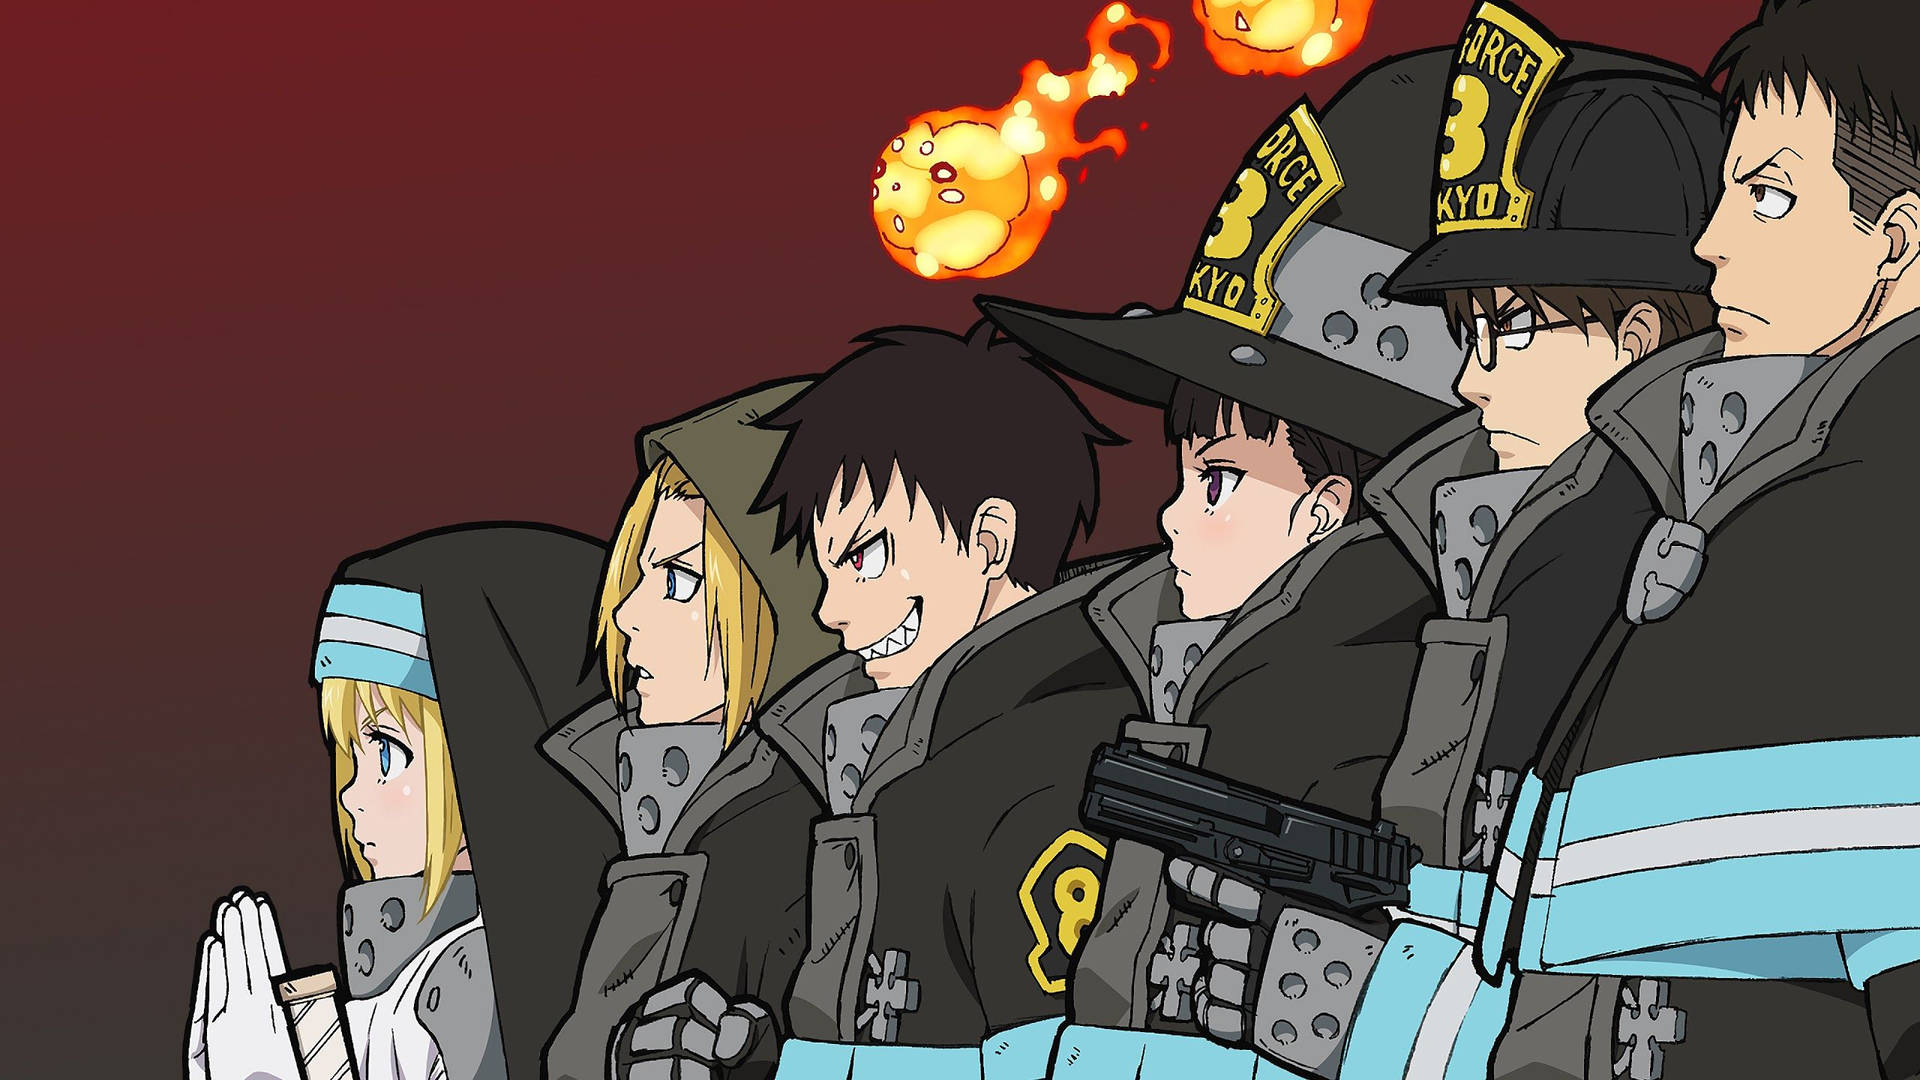 Take a Look at the Team of Fire Force Company 8 Wallpaper